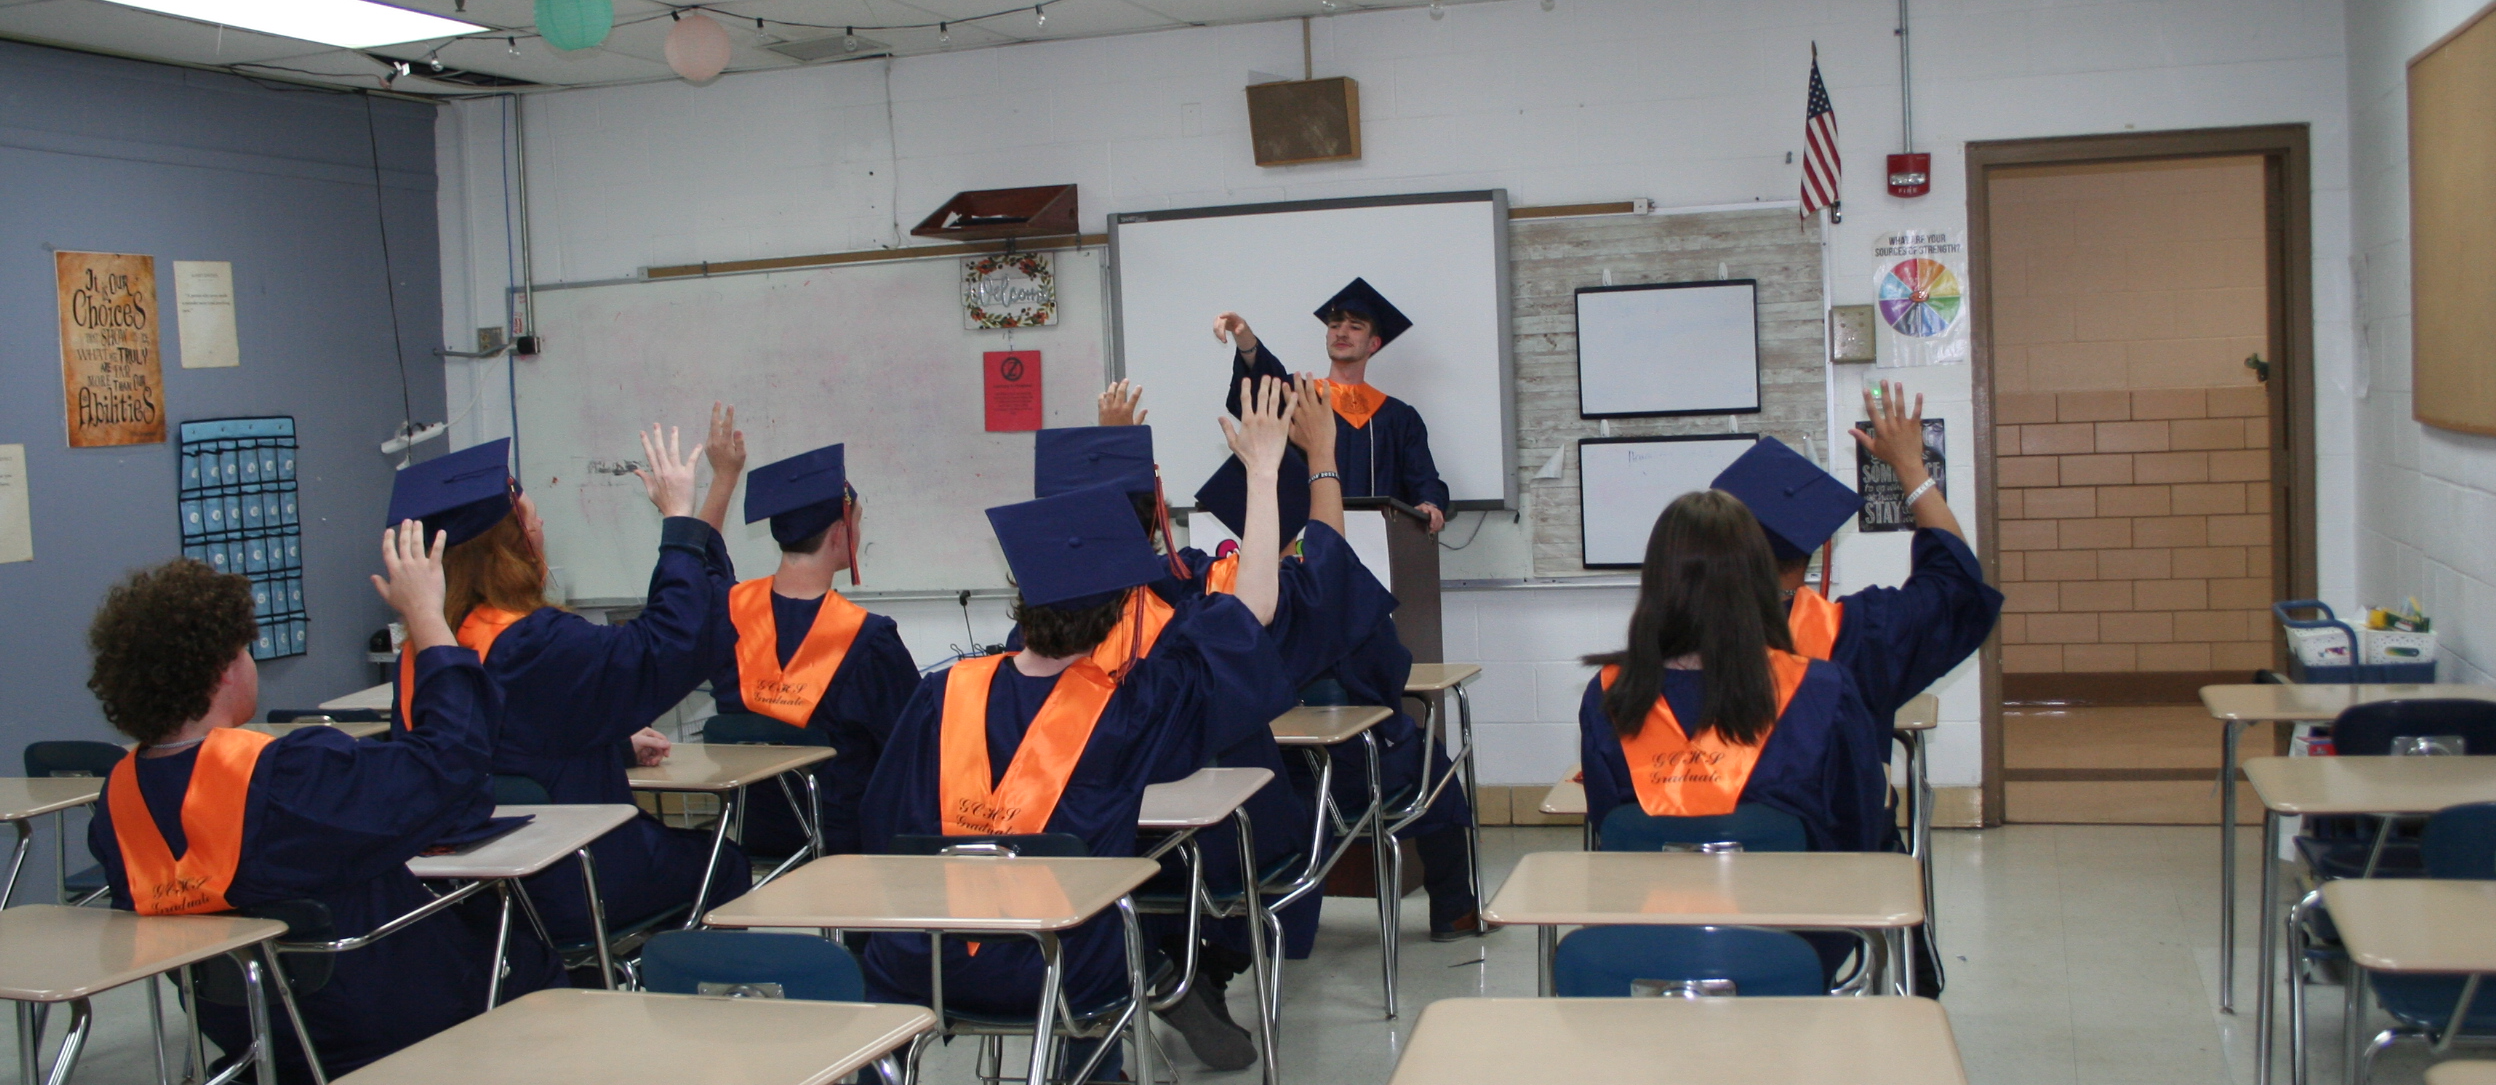 Students seated at desks in classroom, one student in front at podium, all in blues and orange caps and gowns